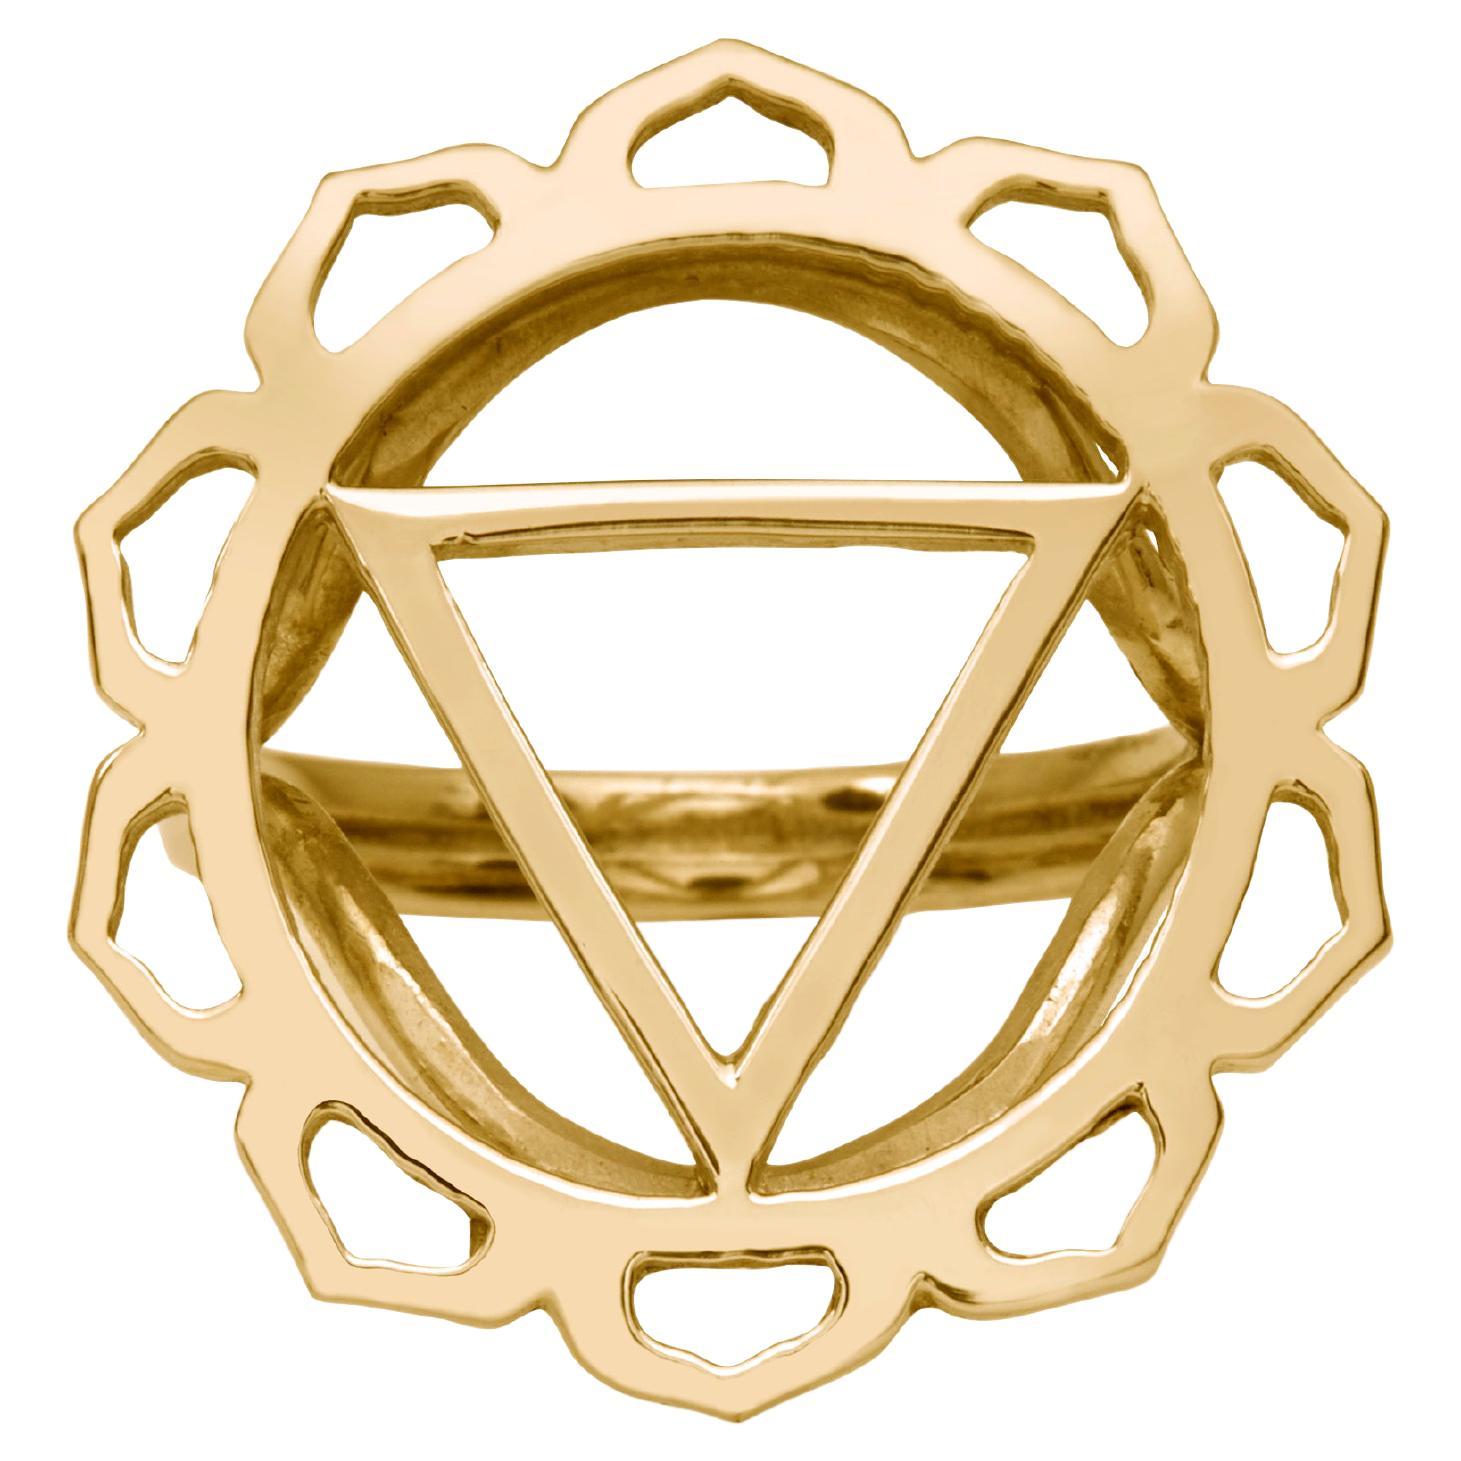 For Sale:  Handcrafted Yoga Ring with Manipura Solar Plexus Chakra in 14Kt Gold